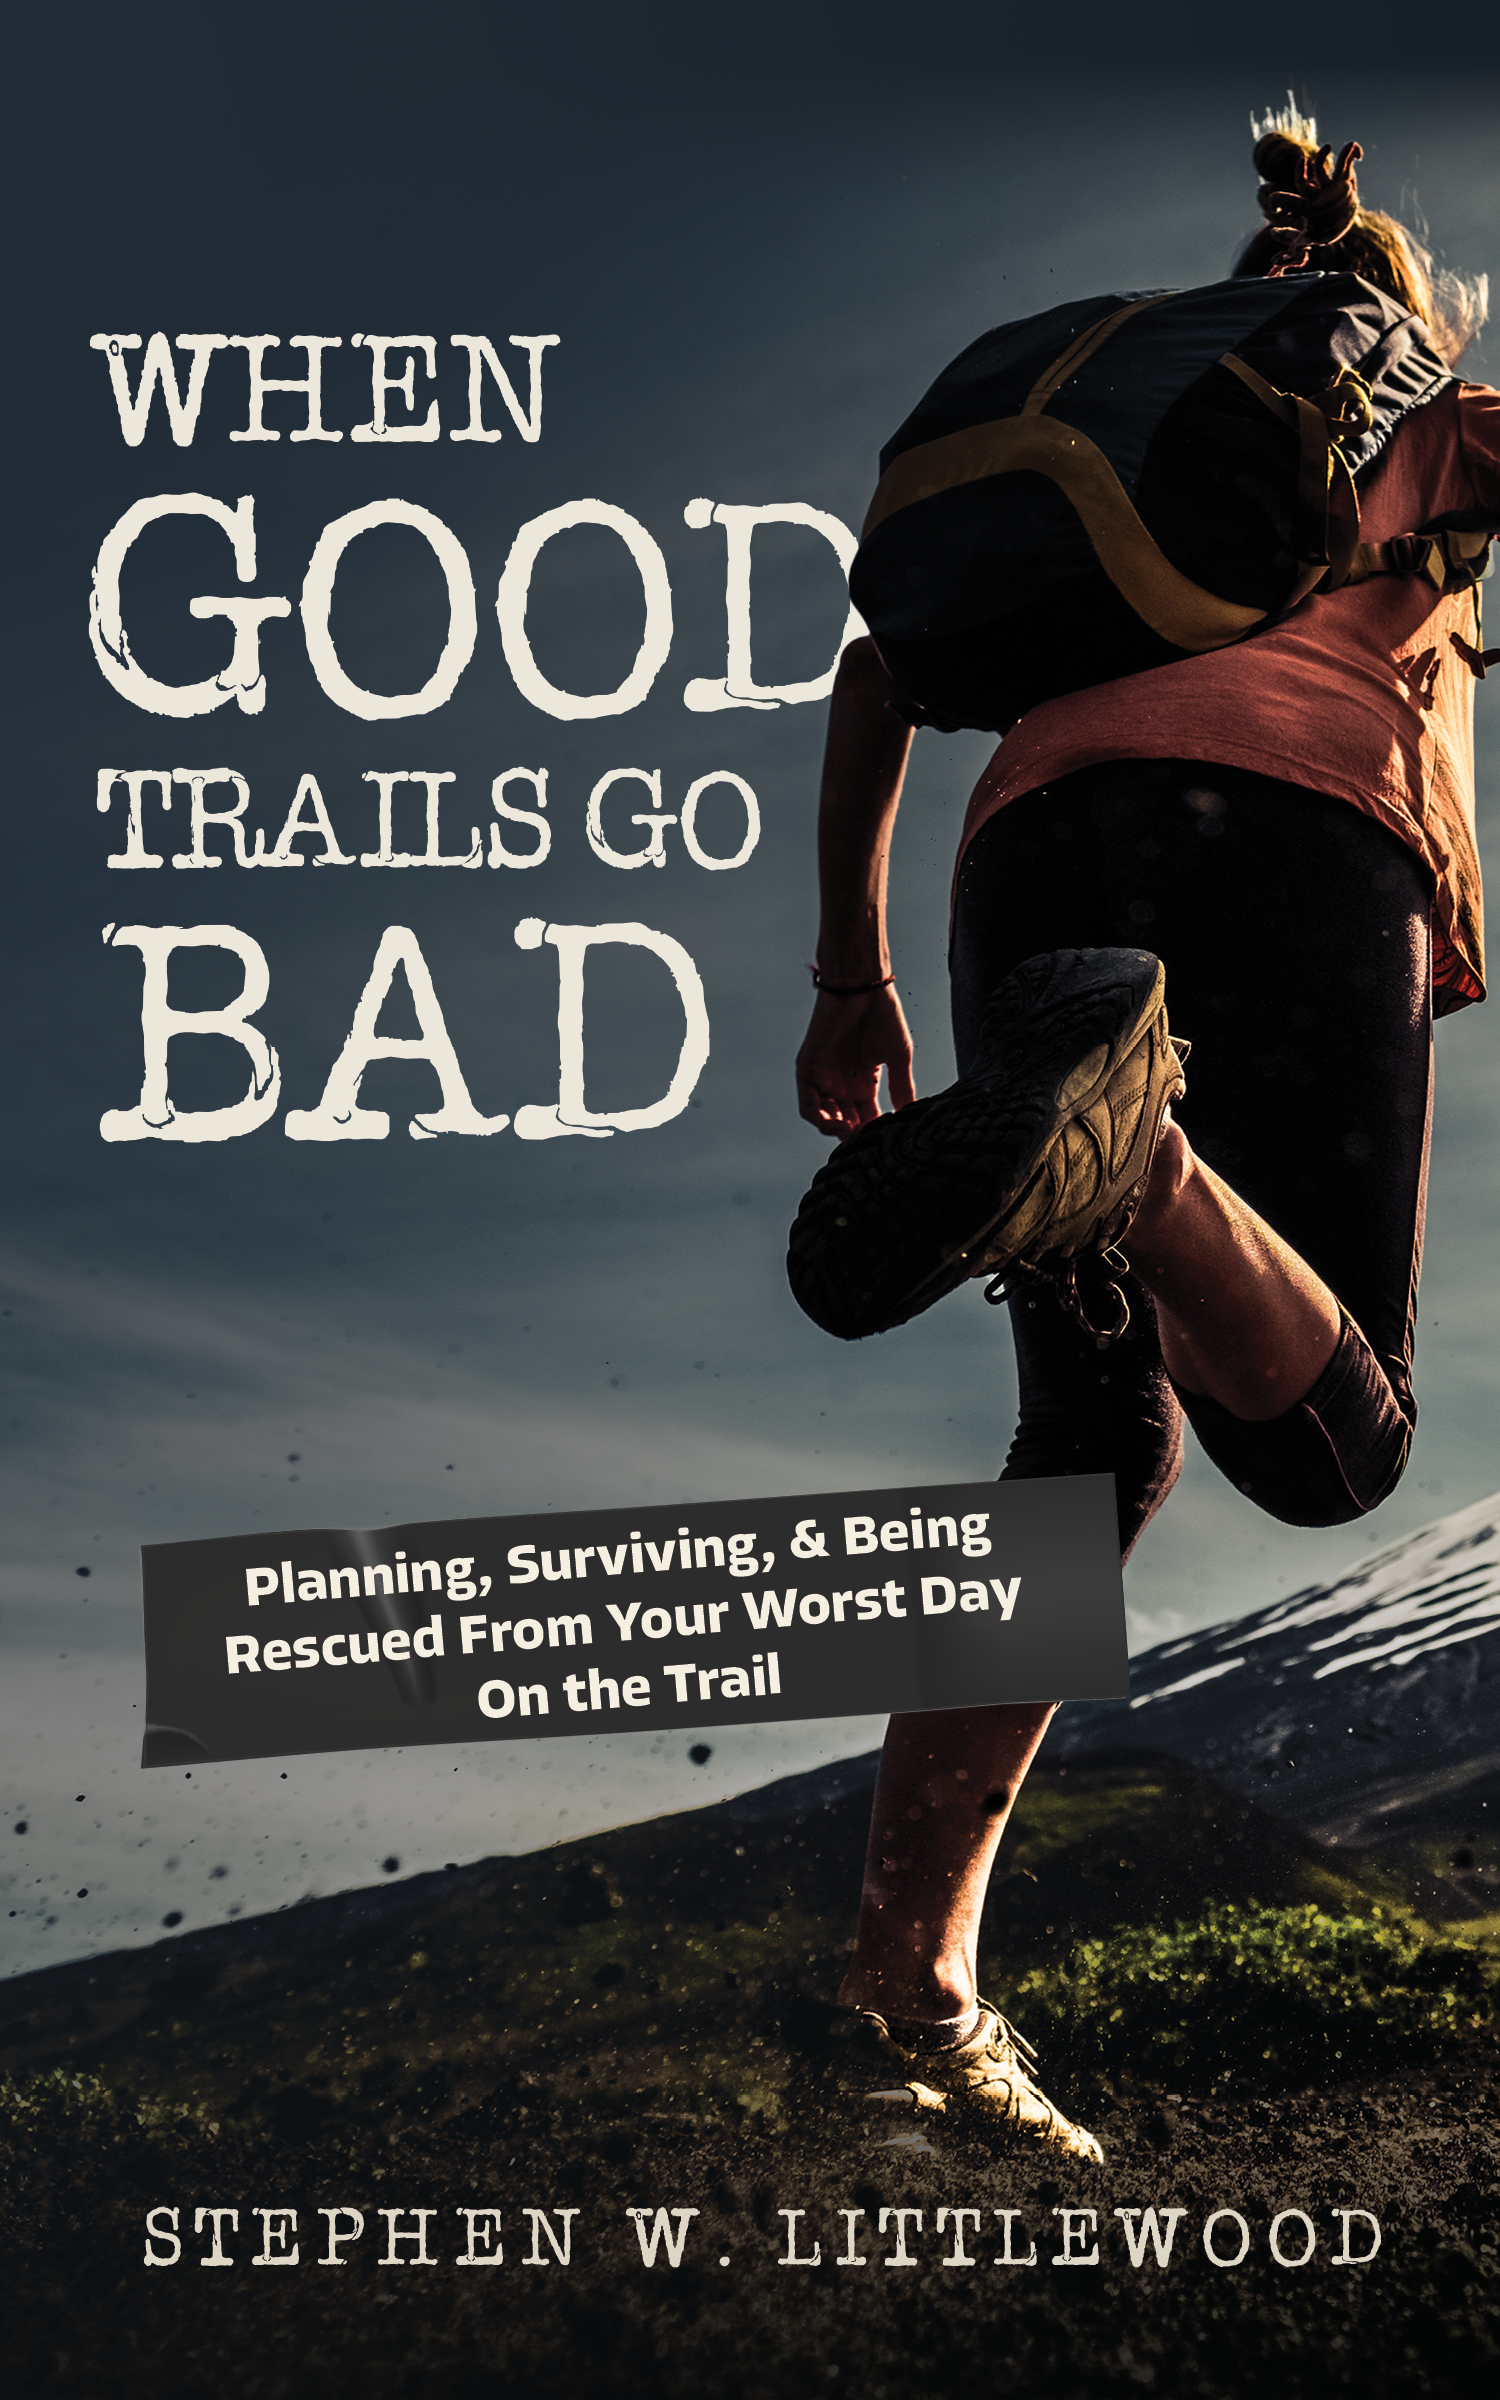 When Good Trails Go Bad